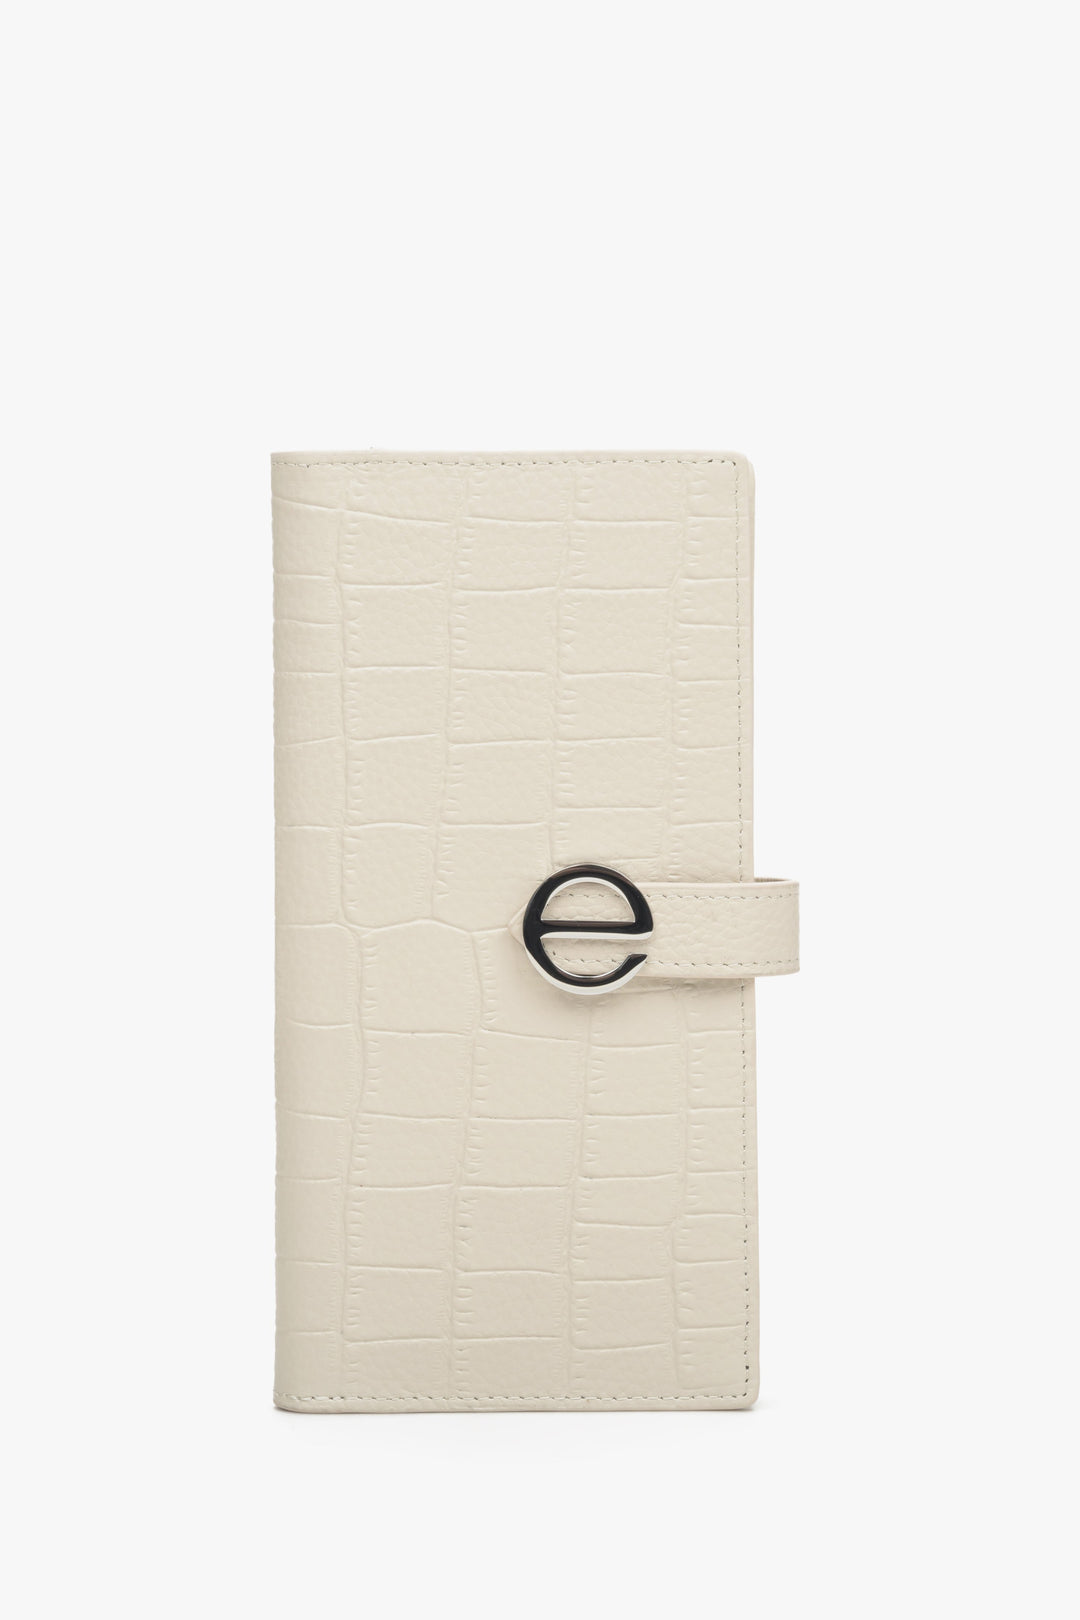 Women's Continental Light Beige Wallet made of Genuine Leather with Silver Details Estro ER00113918.